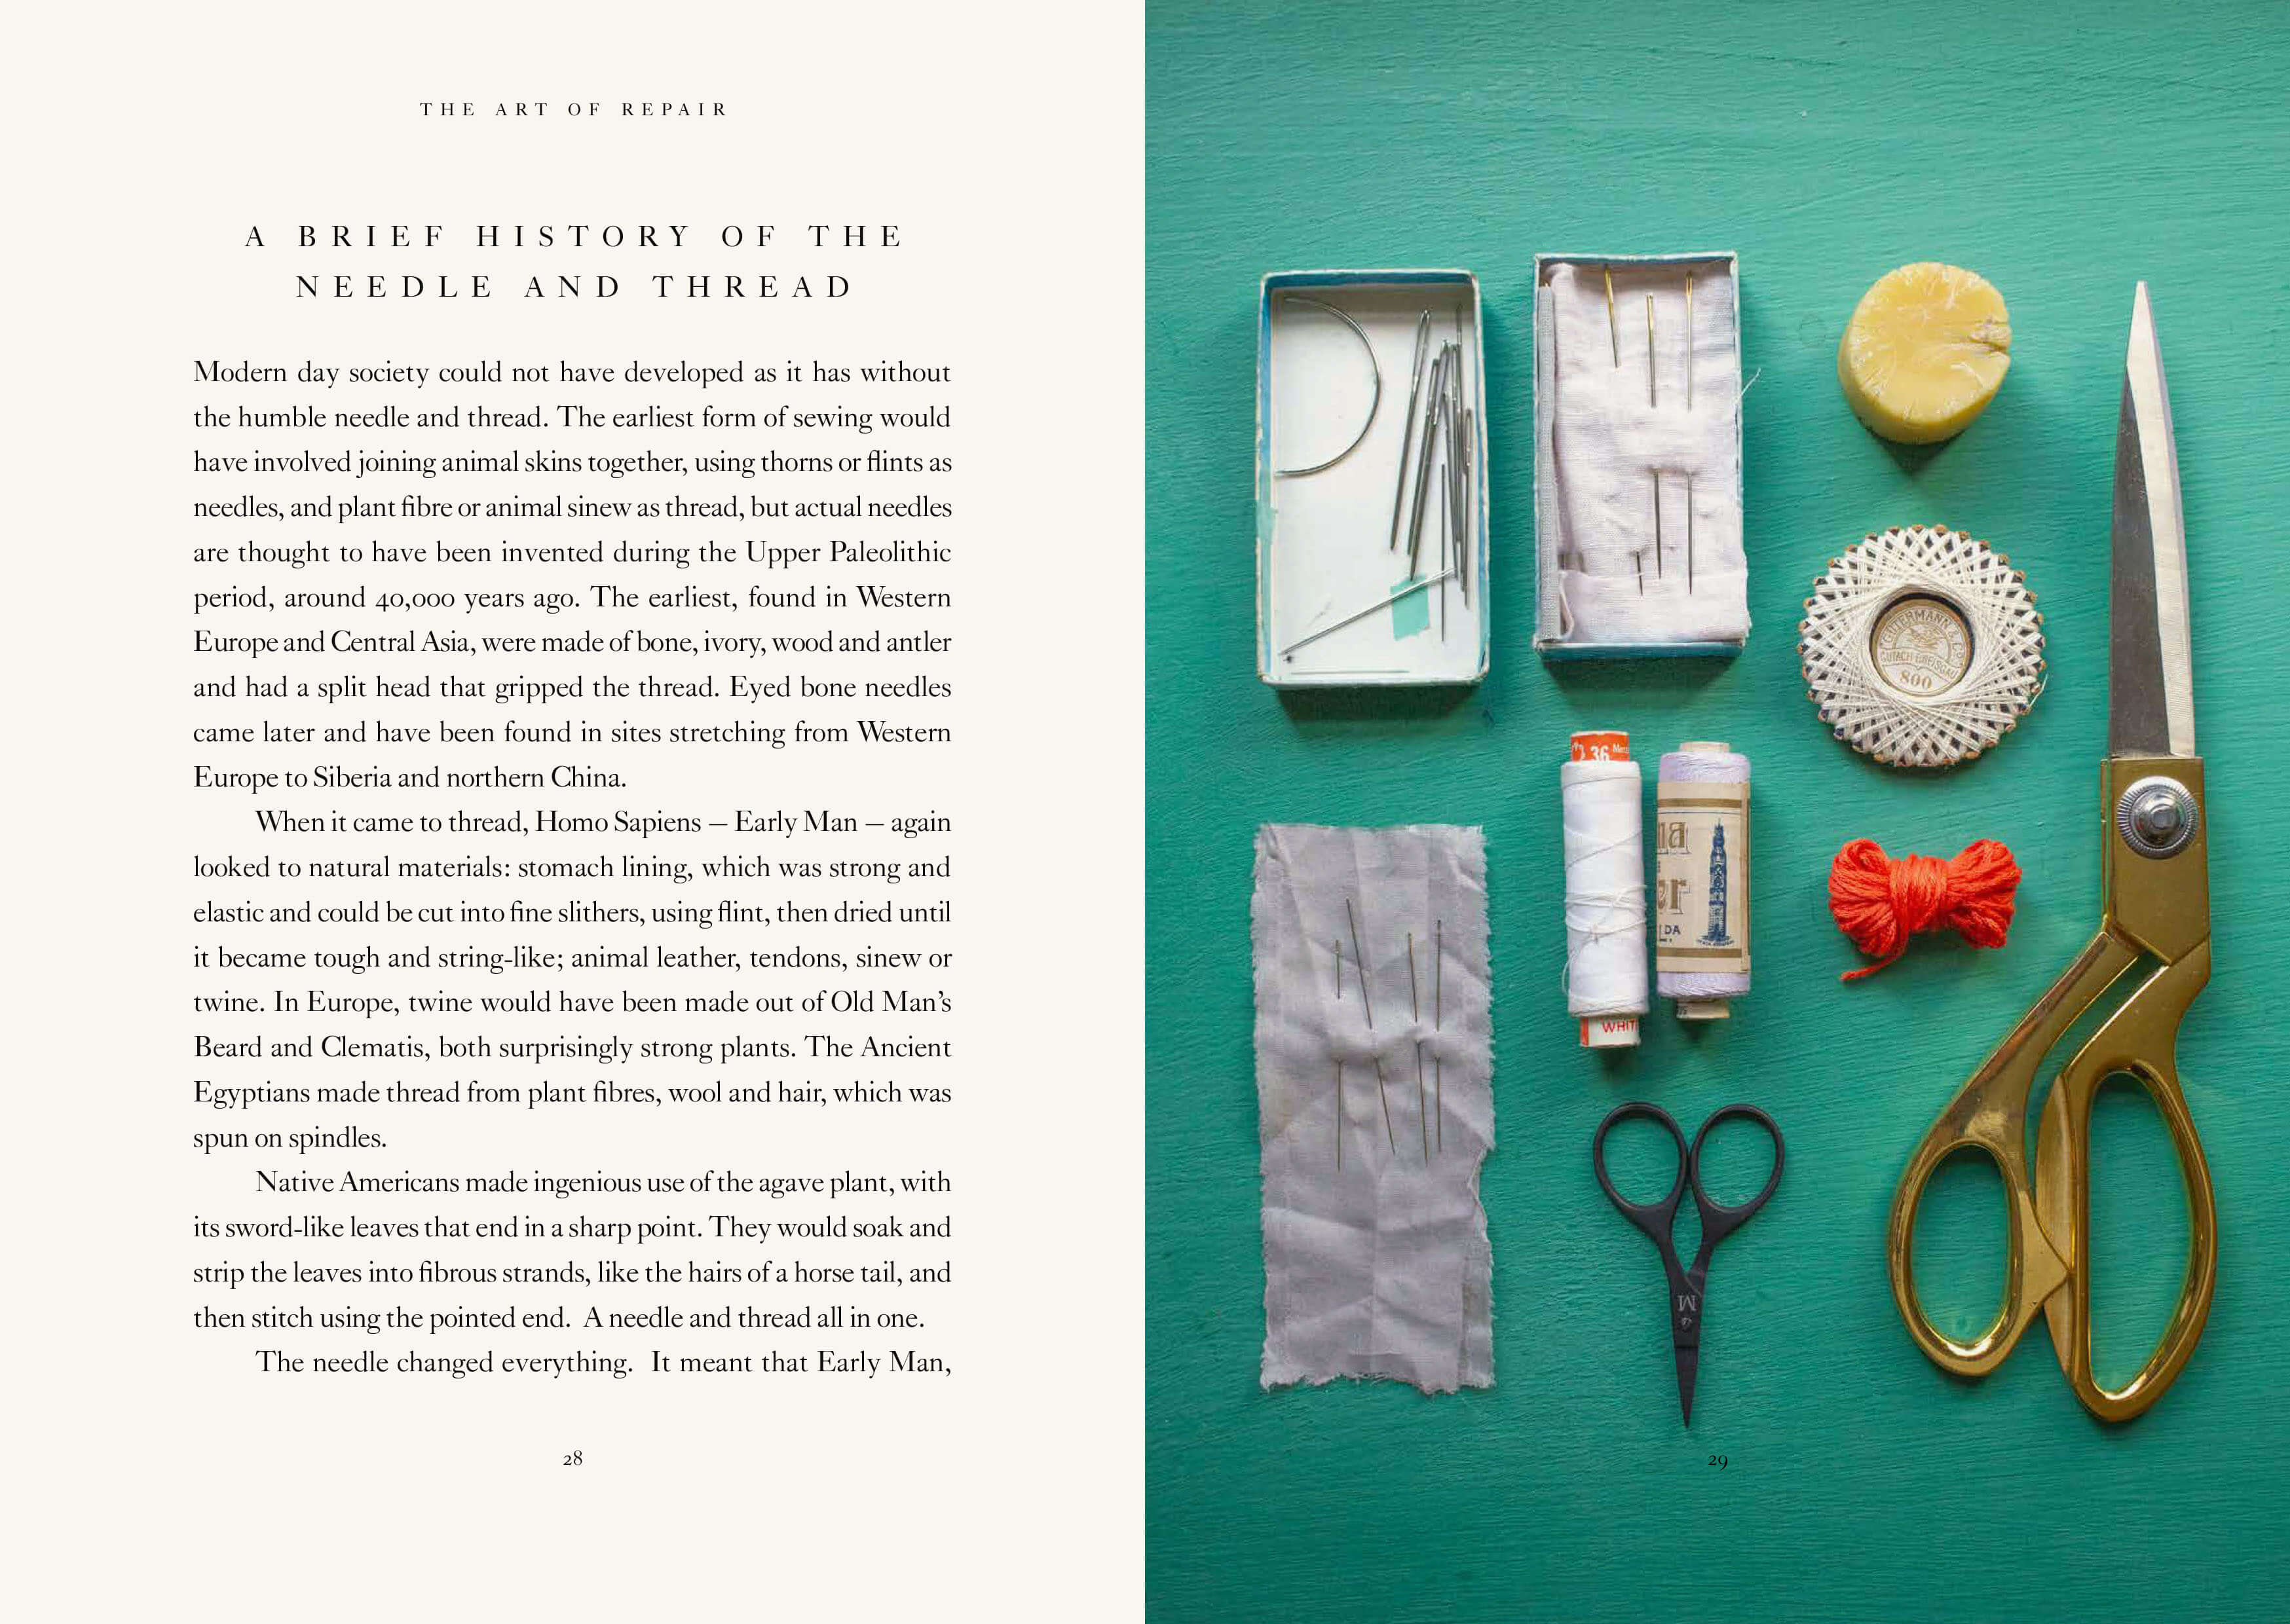 The Art of Repair | Book | by Molly Martin - Lifestory - Bookspeed